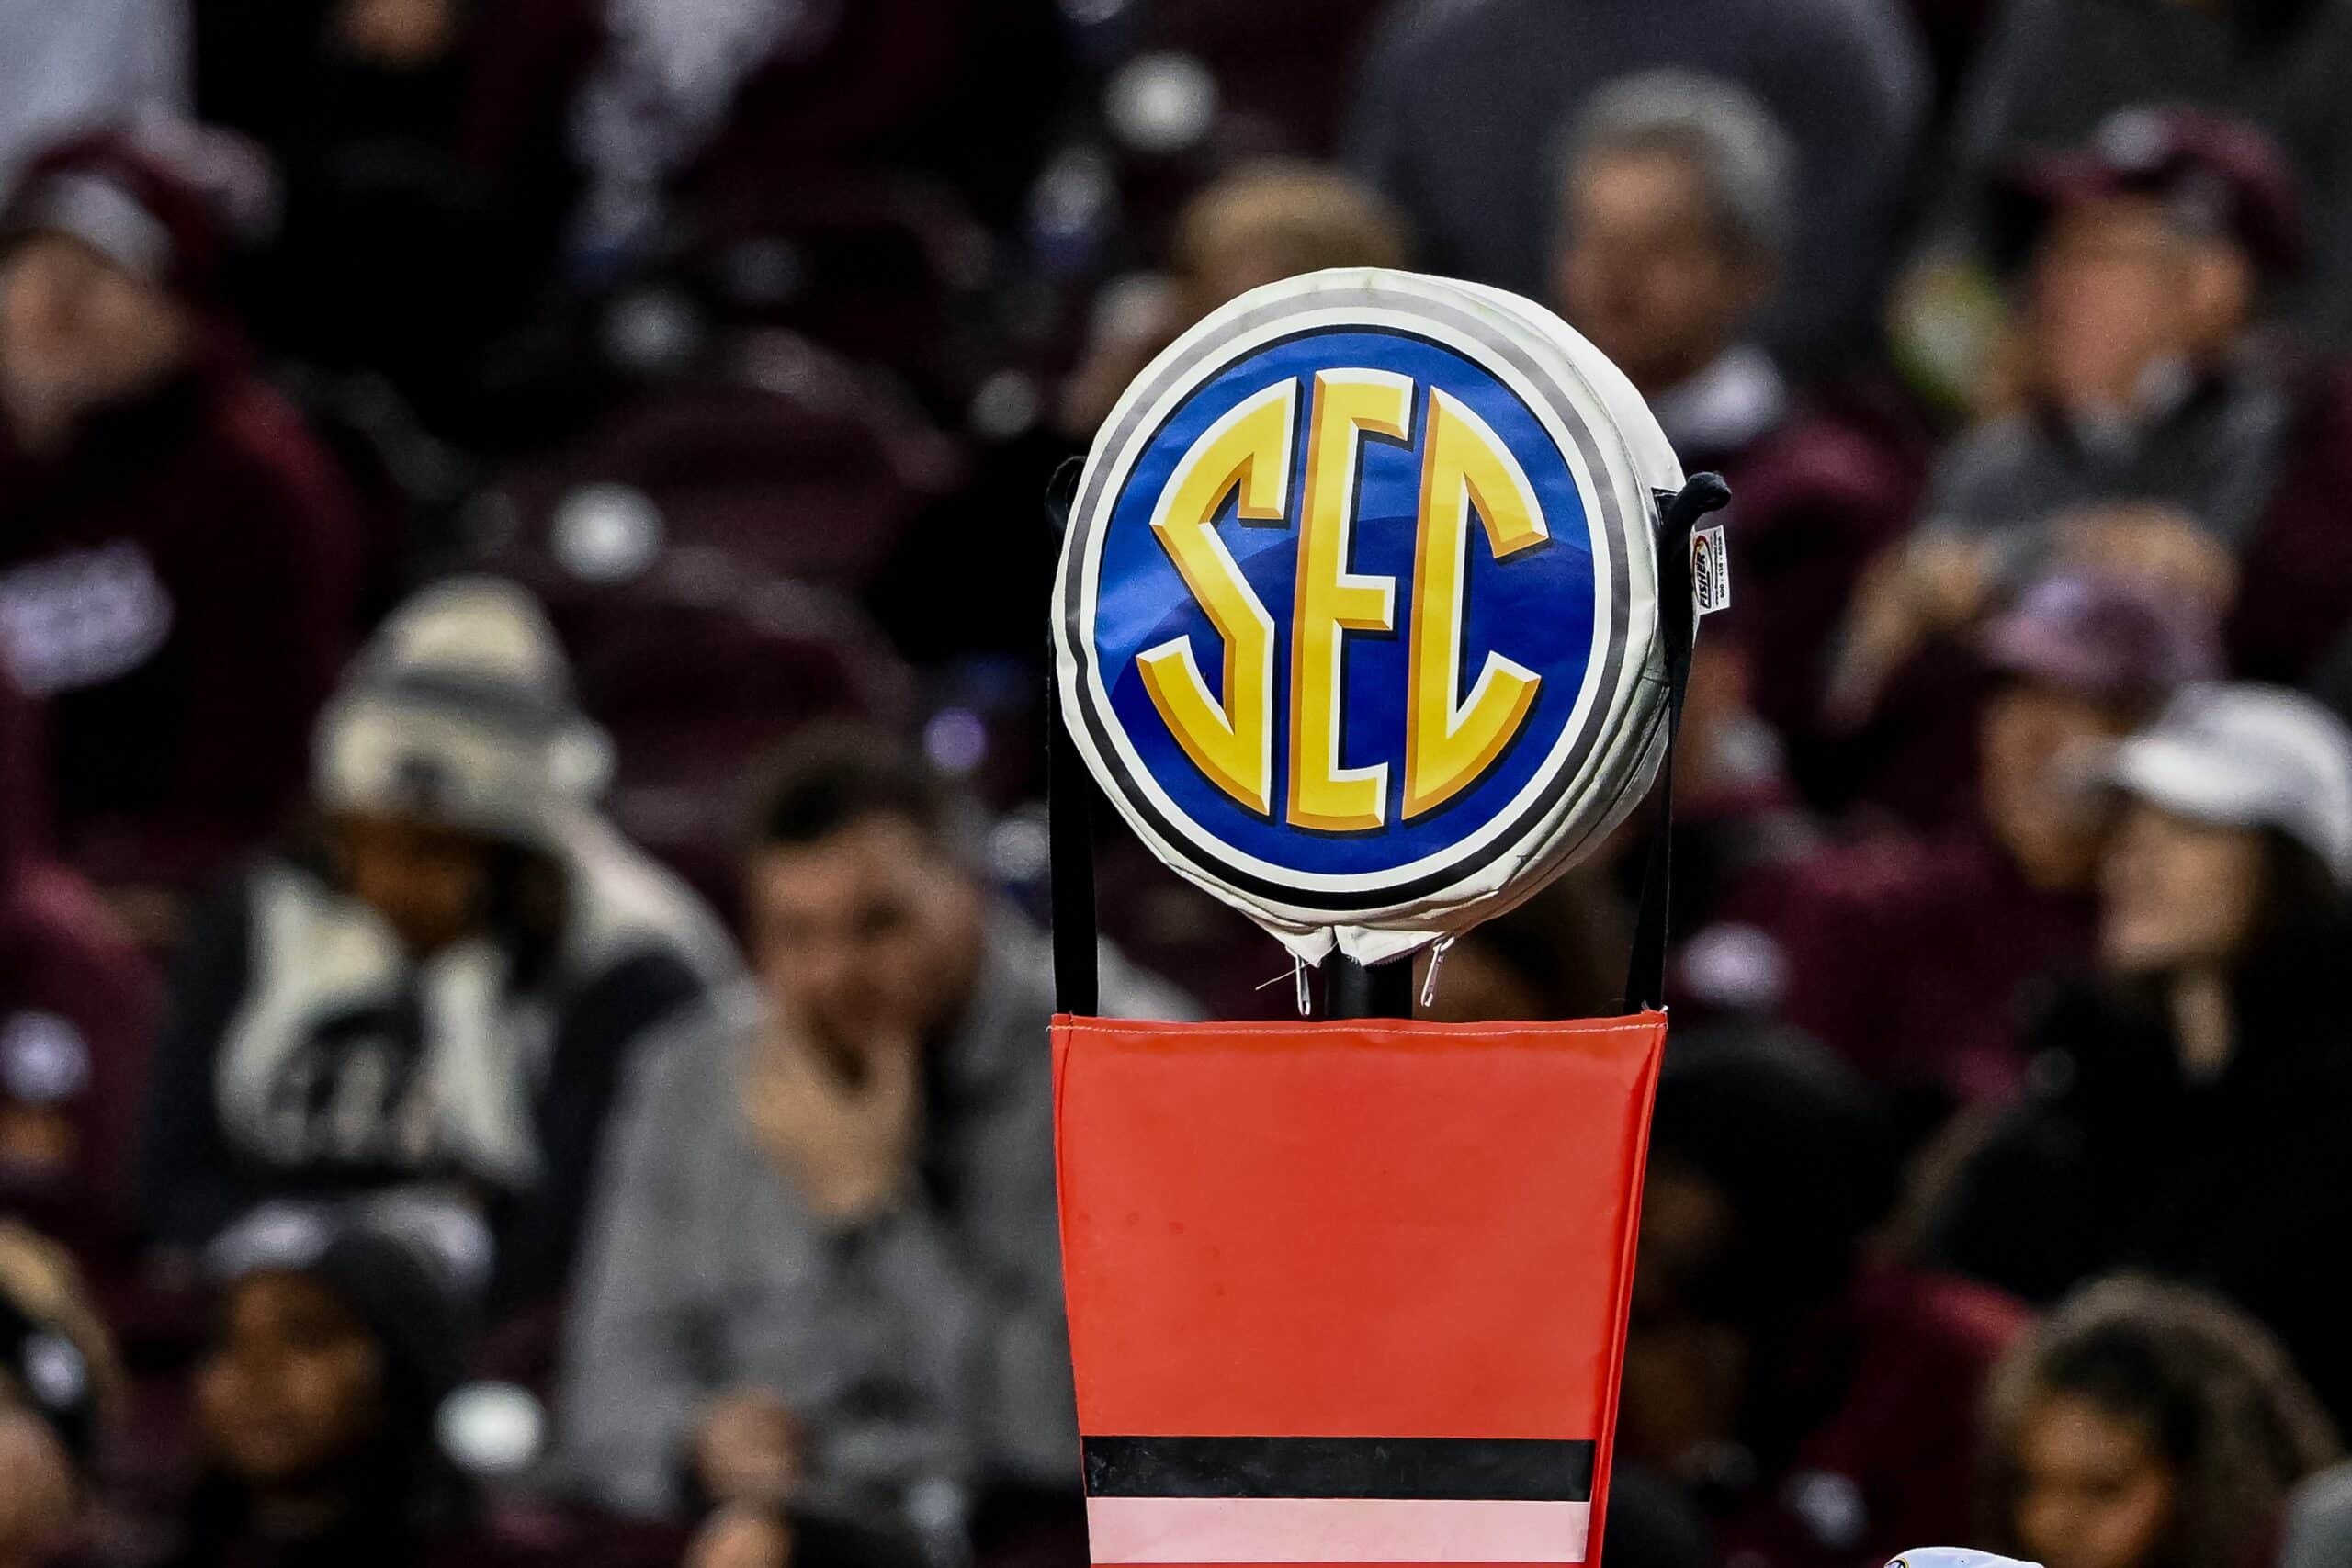 Nov 11, 2023; College Station, Texas, USA; A detailed view of the SEC logo on a chain marker during the game between the Texas A&M Aggies and the Mississippi State Bulldogs at Kyle Field.